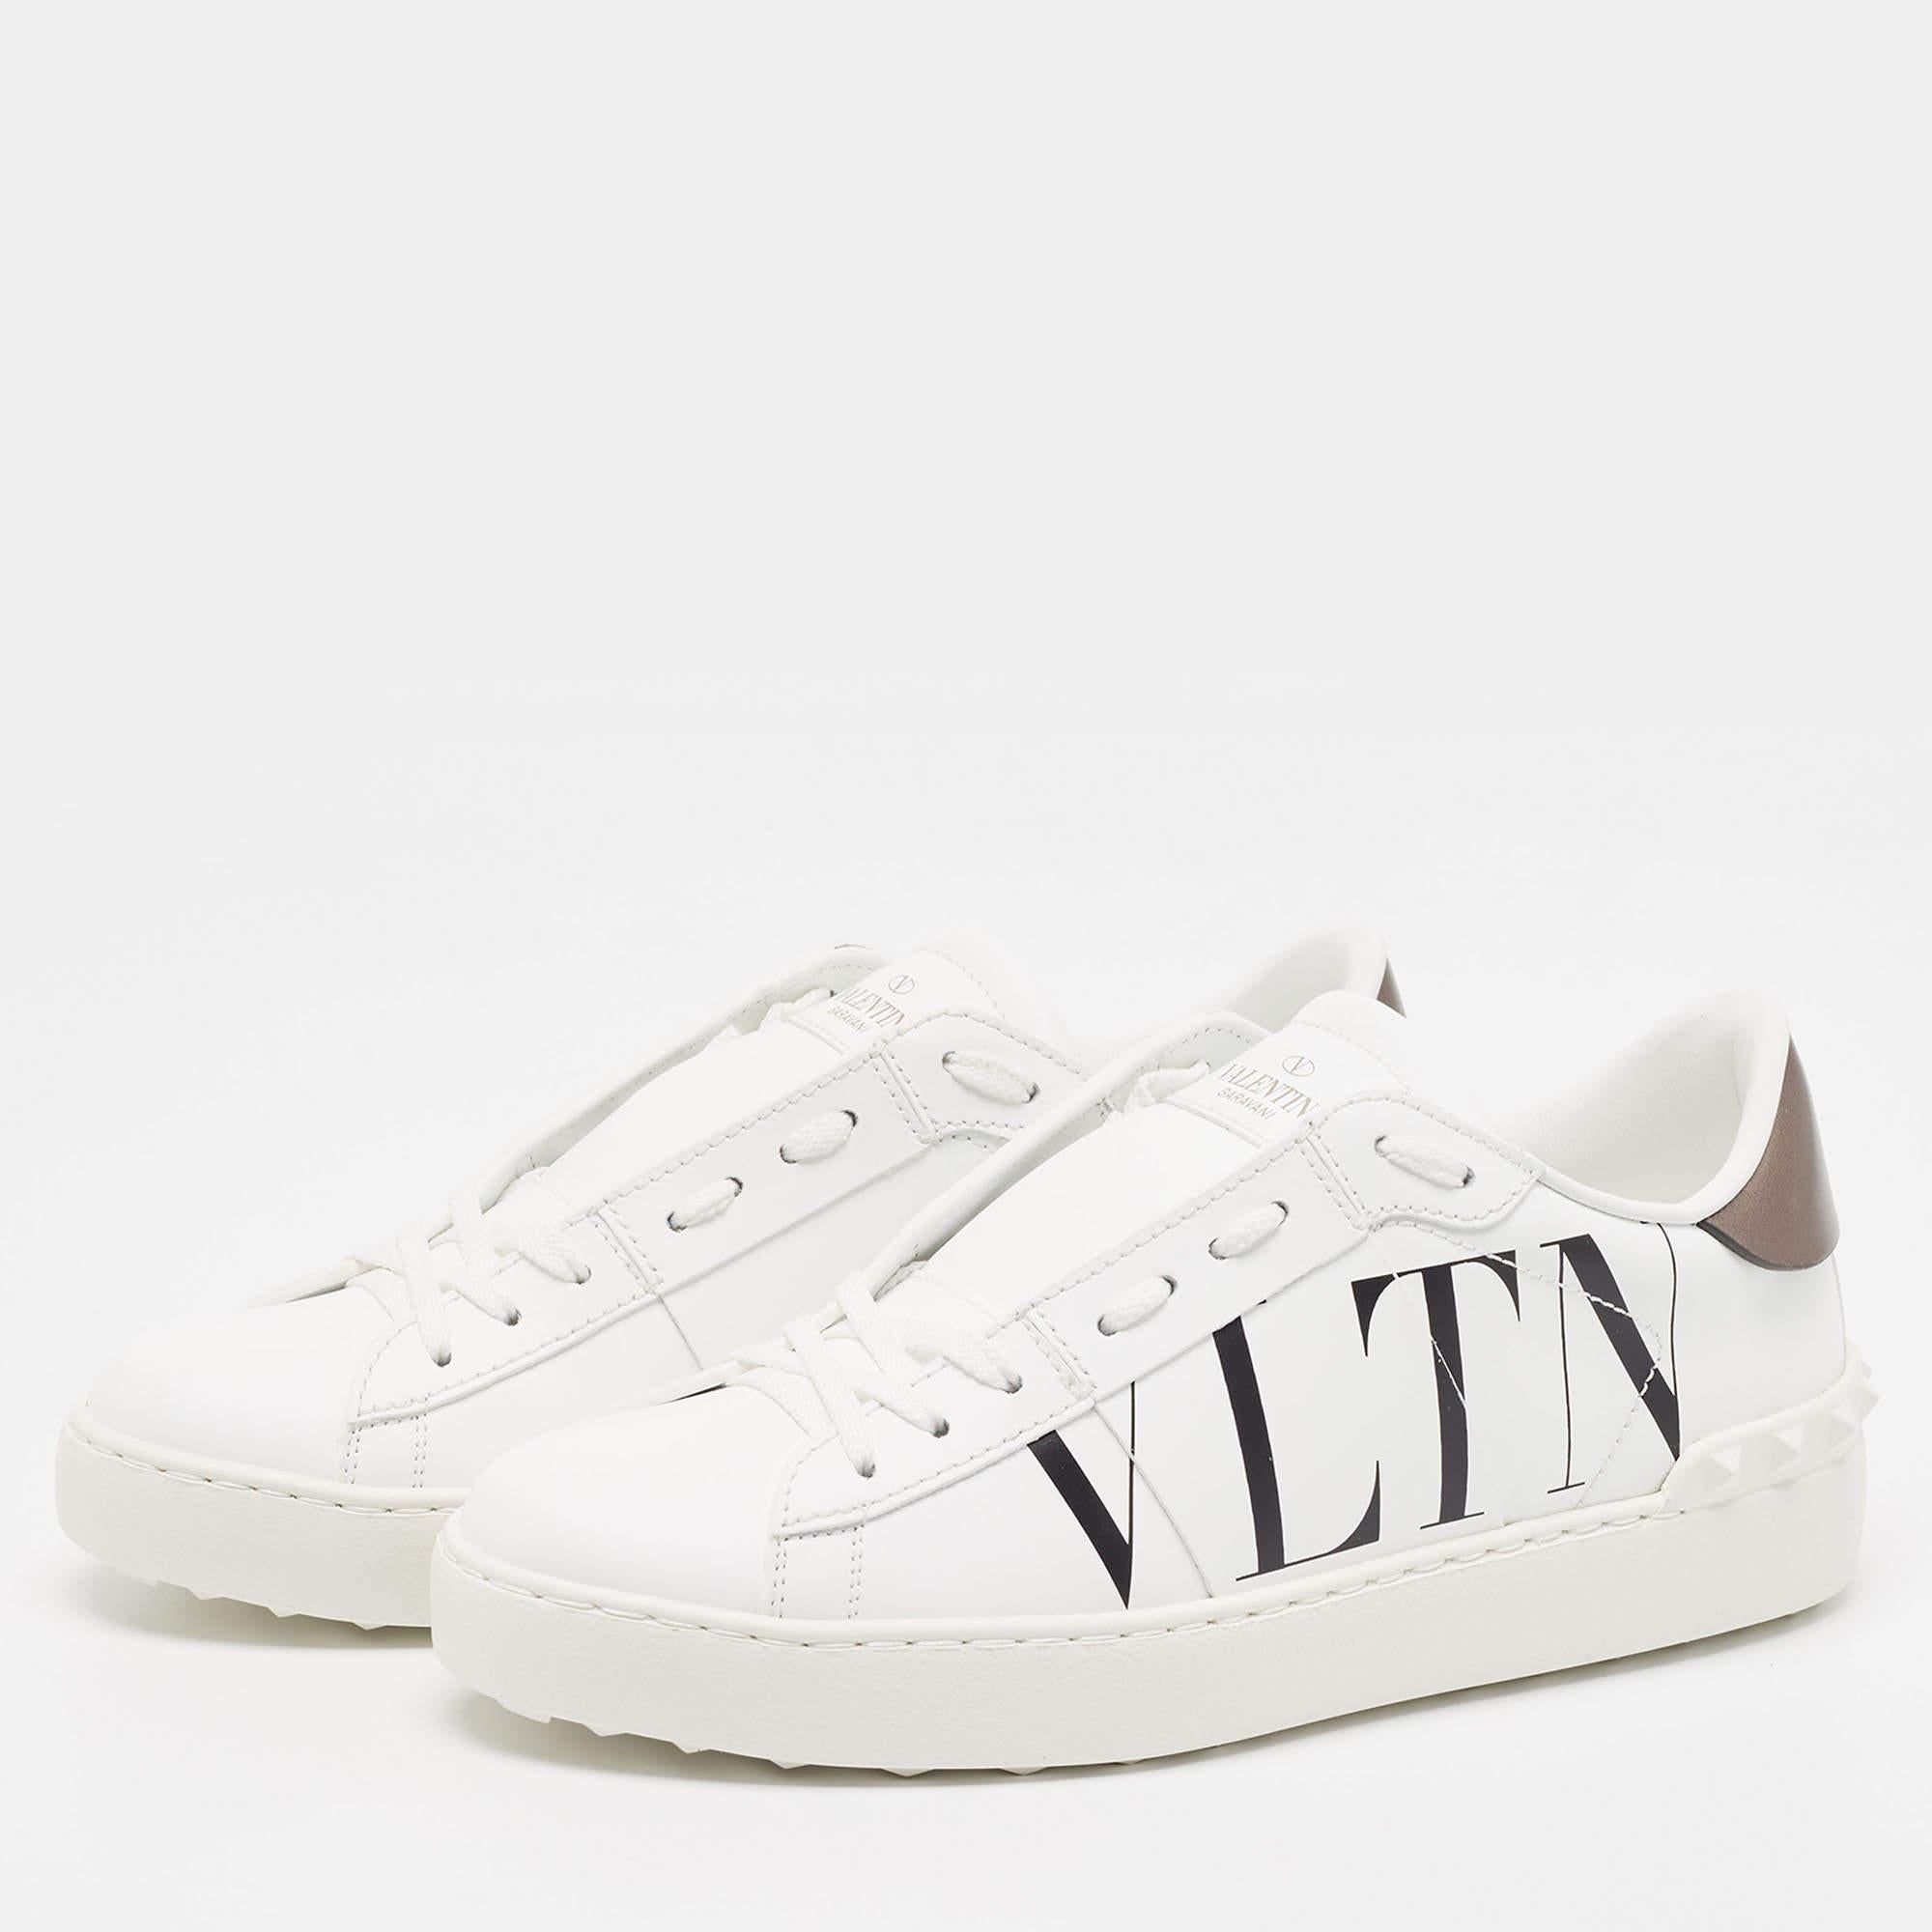 Coming in a classic silhouette, these designer sneakers are a seamless combination of luxury, comfort, and style. These sneakers are finished with signature details and comfortable insoles.

Includes: Extra lace, Original Dustbag, Original Box, Info